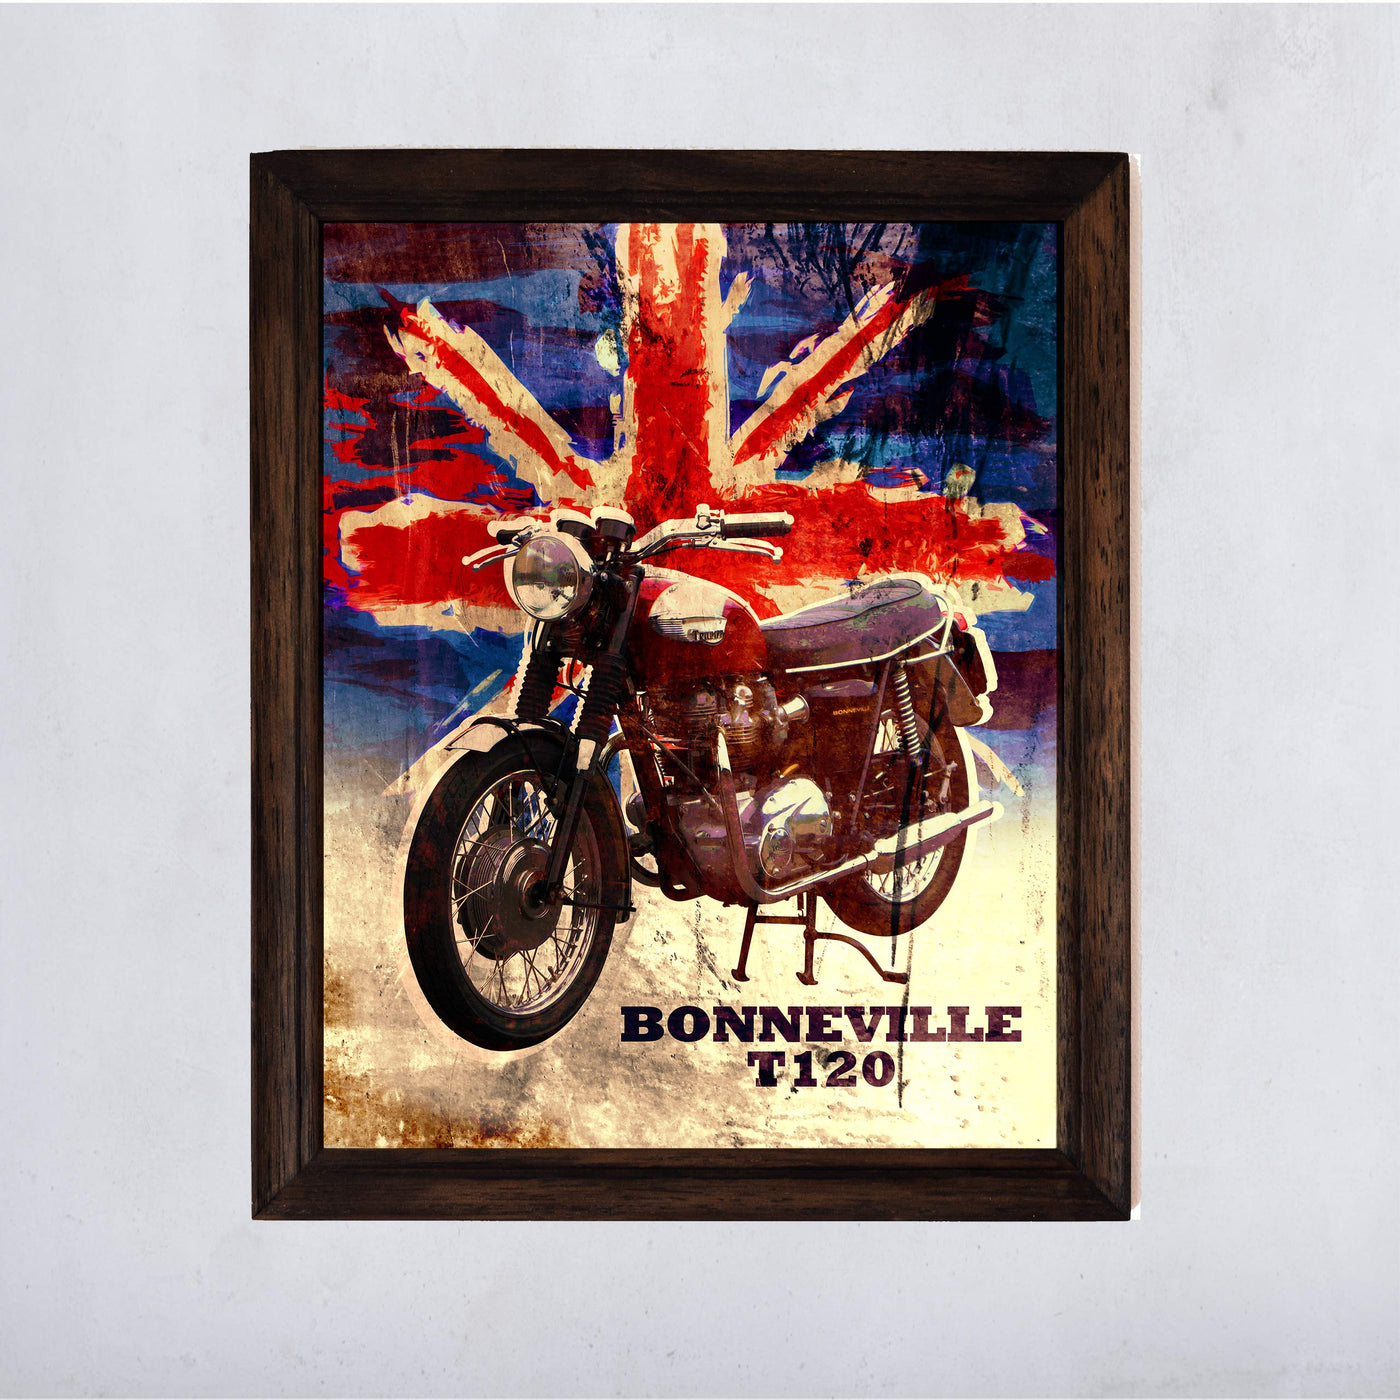 Triumph Bonneville T120 Motorcycle-Vintage Poster Print-11 x14" Retro Wall Decor-Ready to Frame. Home-Office-Bar-Cave Decor. Perfect Sign for the Garage-Shop. Great Motorcycle-Automotive Gift!